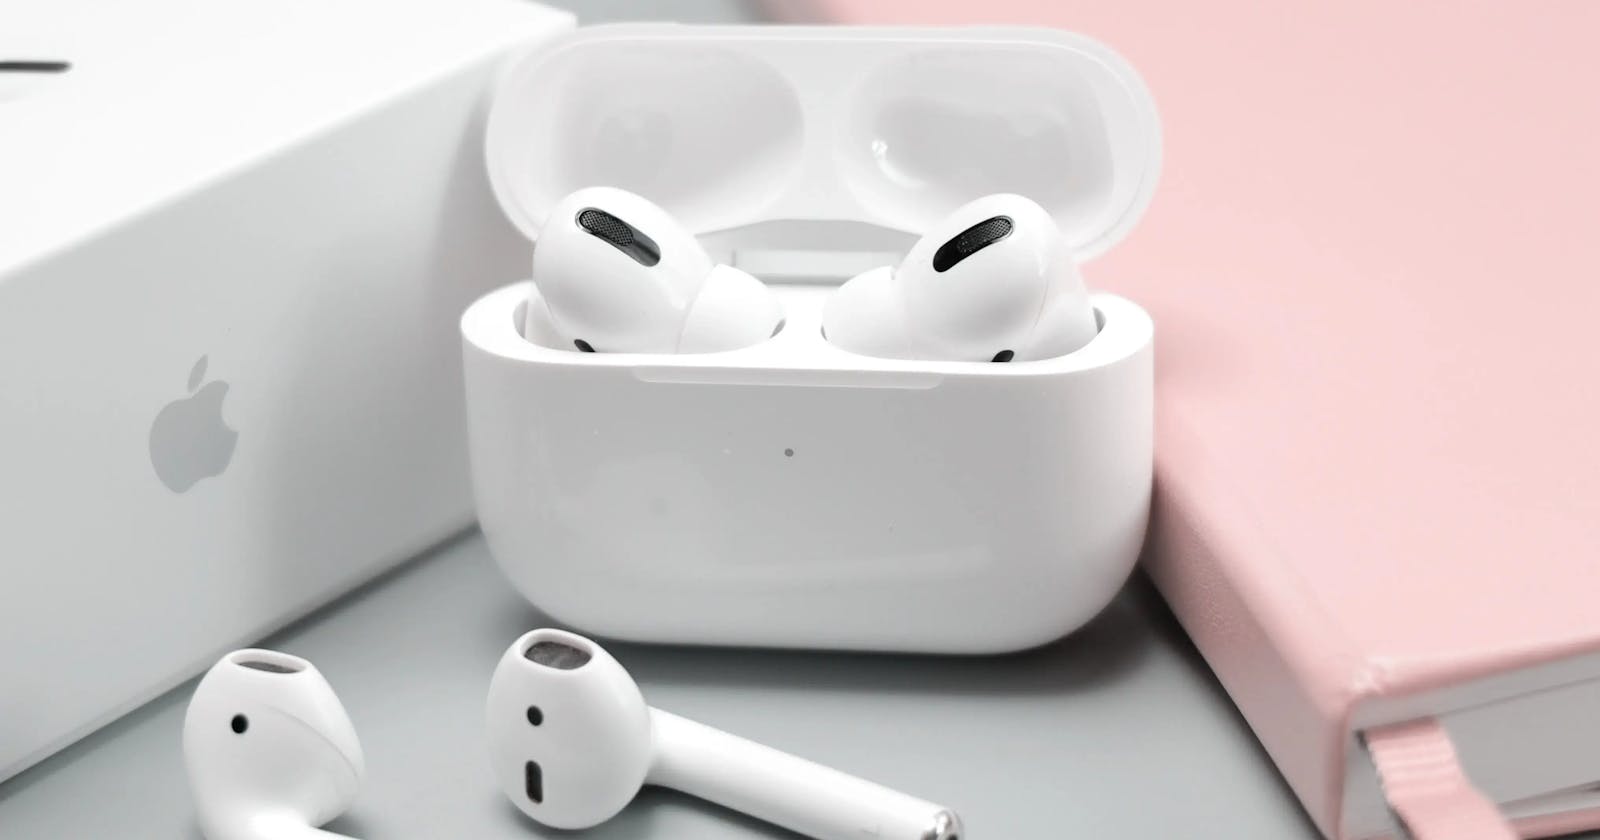 Apple Is Preparing to Produce AirPods in India